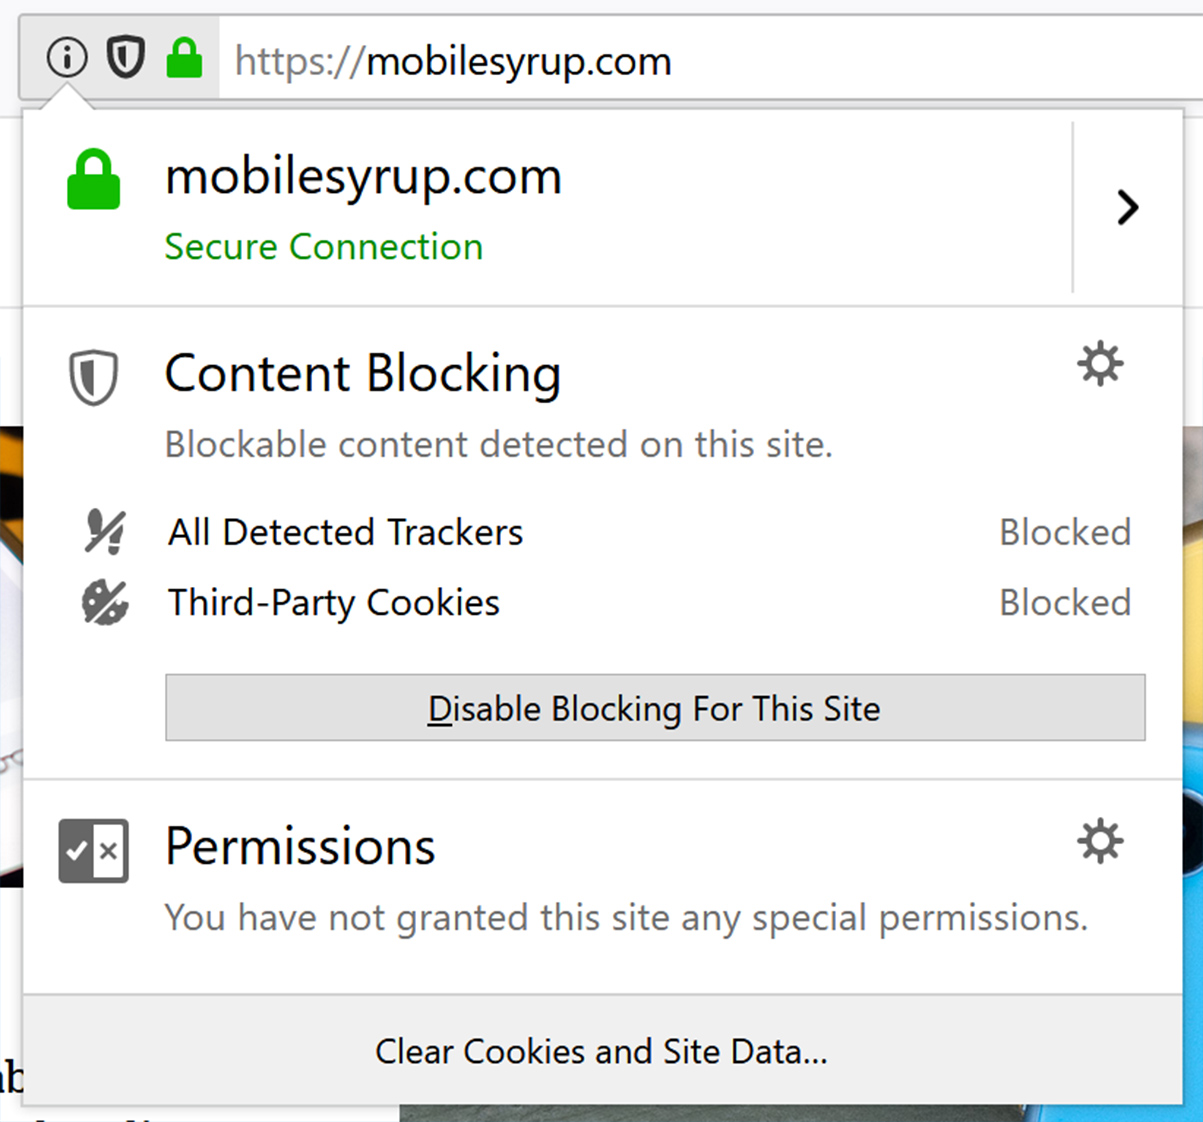 Disabling trackers for a specific site